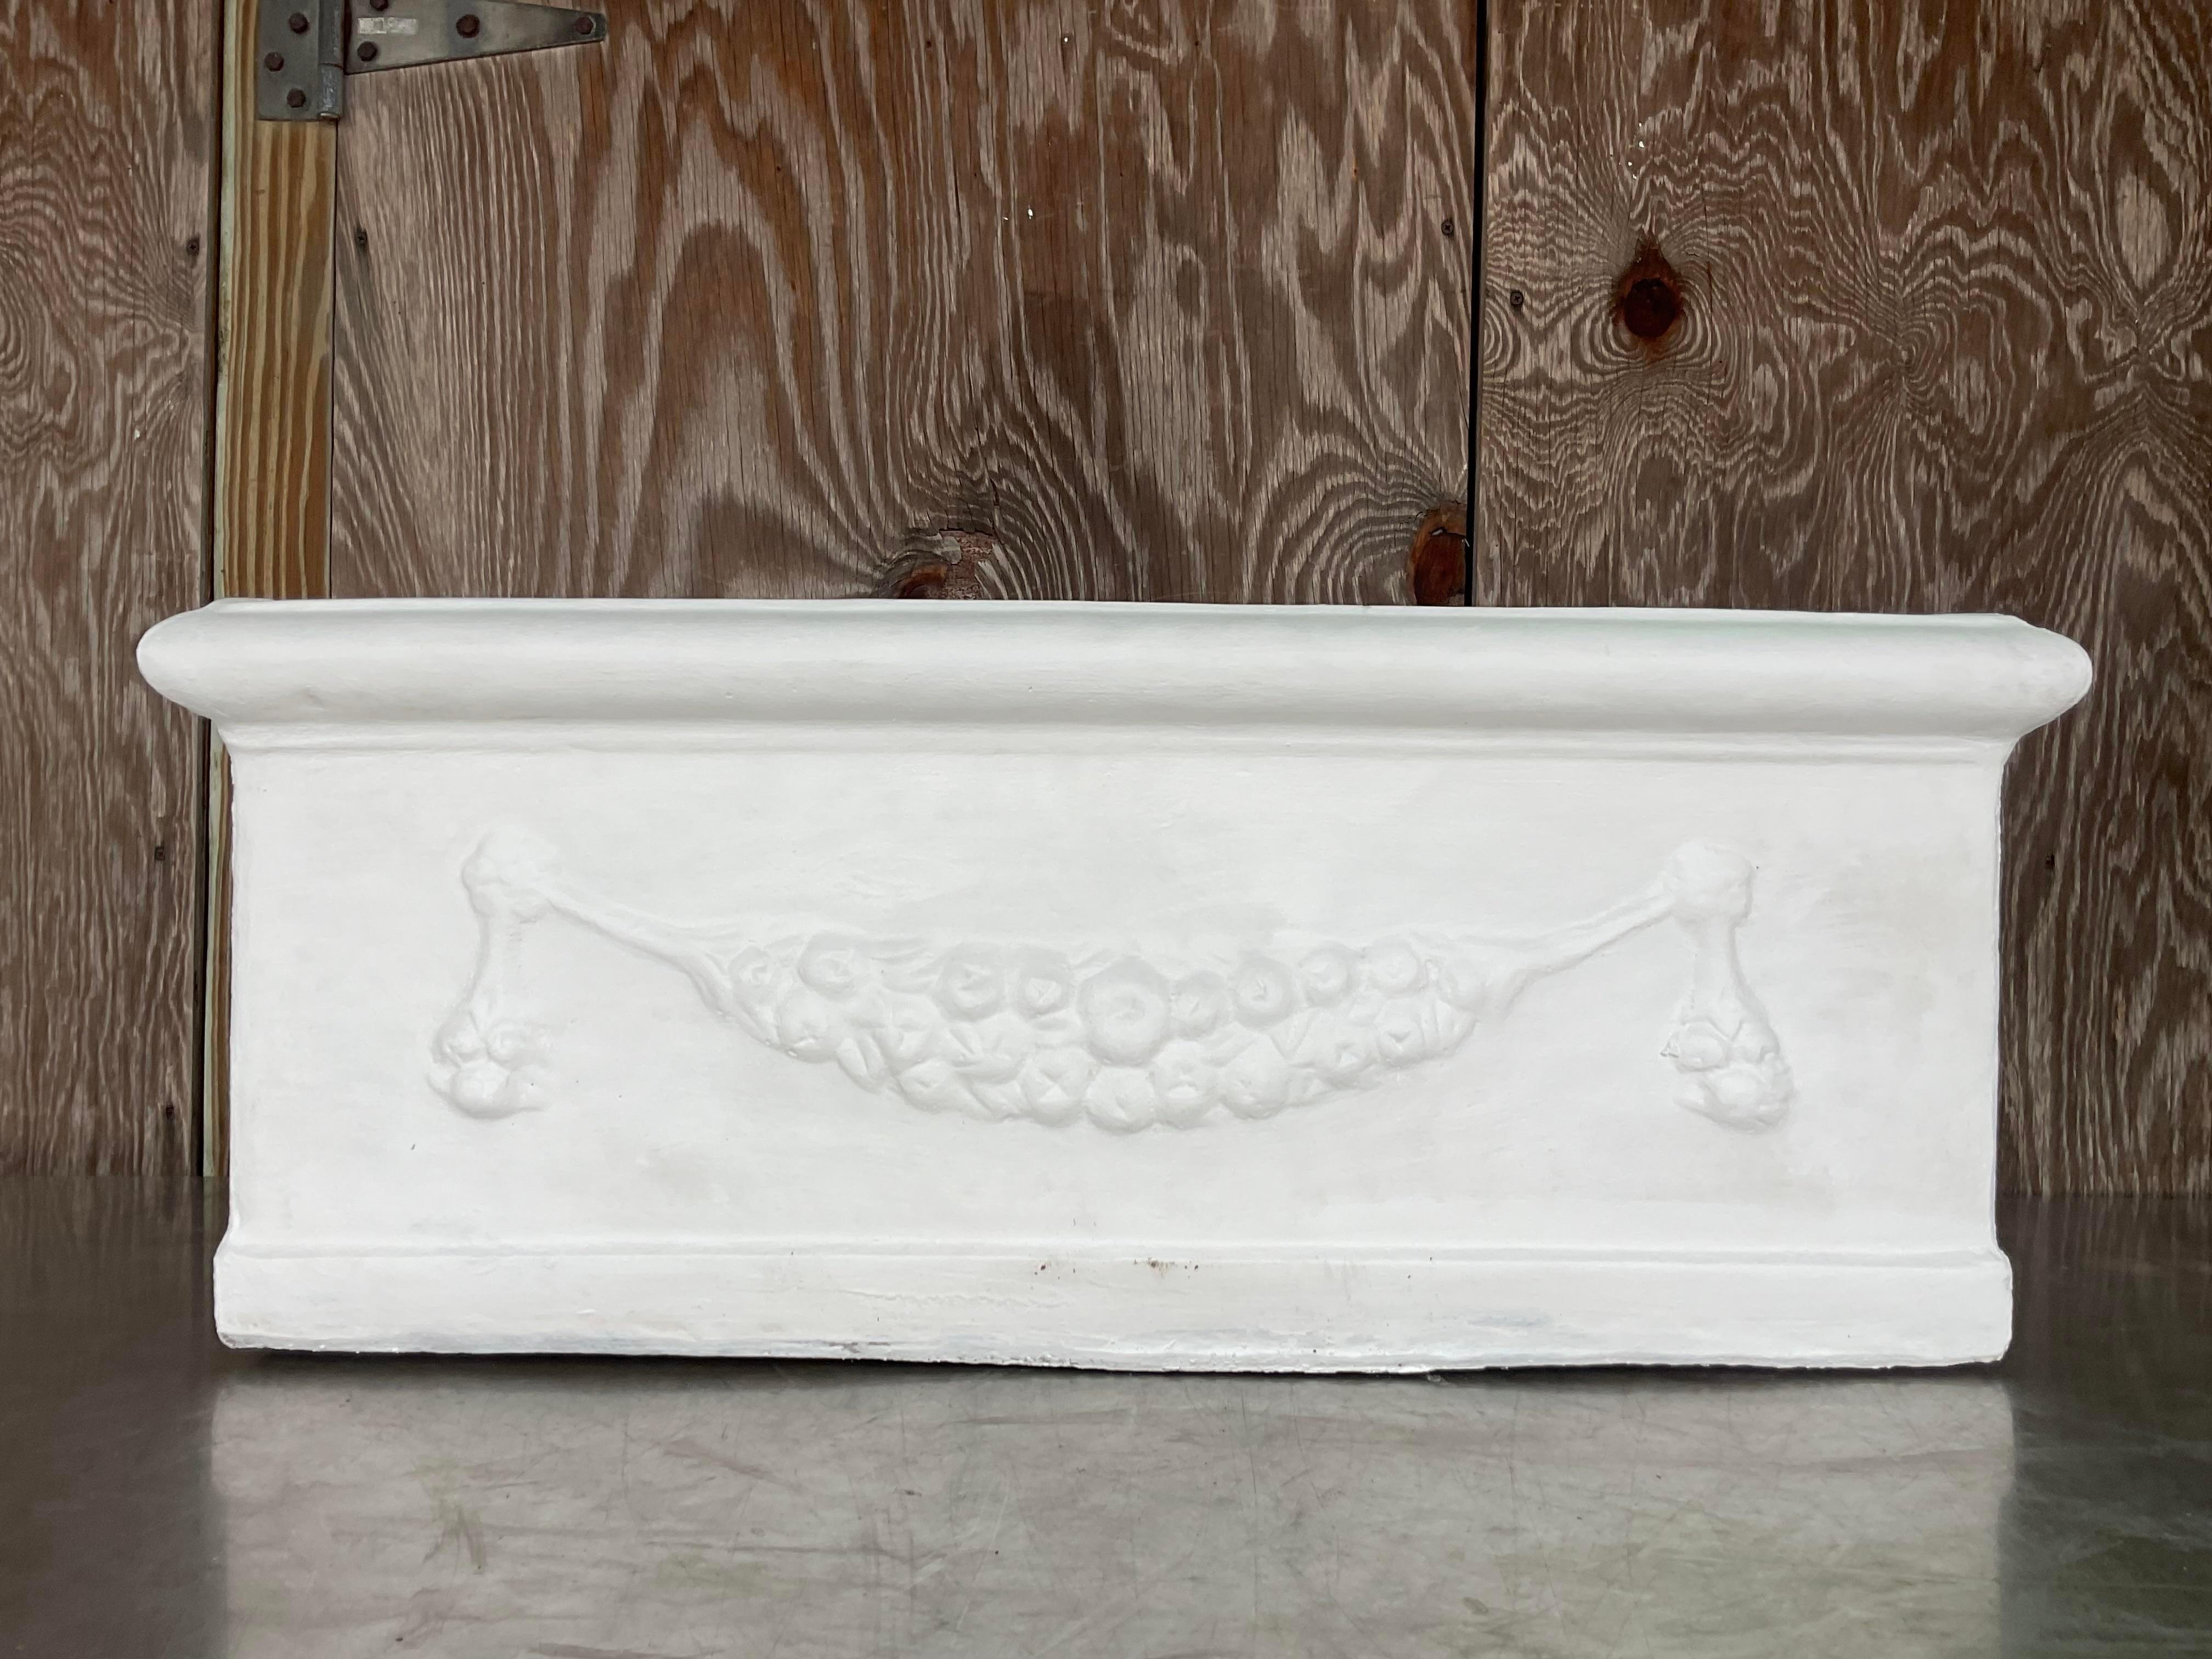 A fabulous vintage Coastal planter. A chic cast concrete with a hanging laurel motif. 16 planters available on my Chairish page. Acquired from a Delray estate.